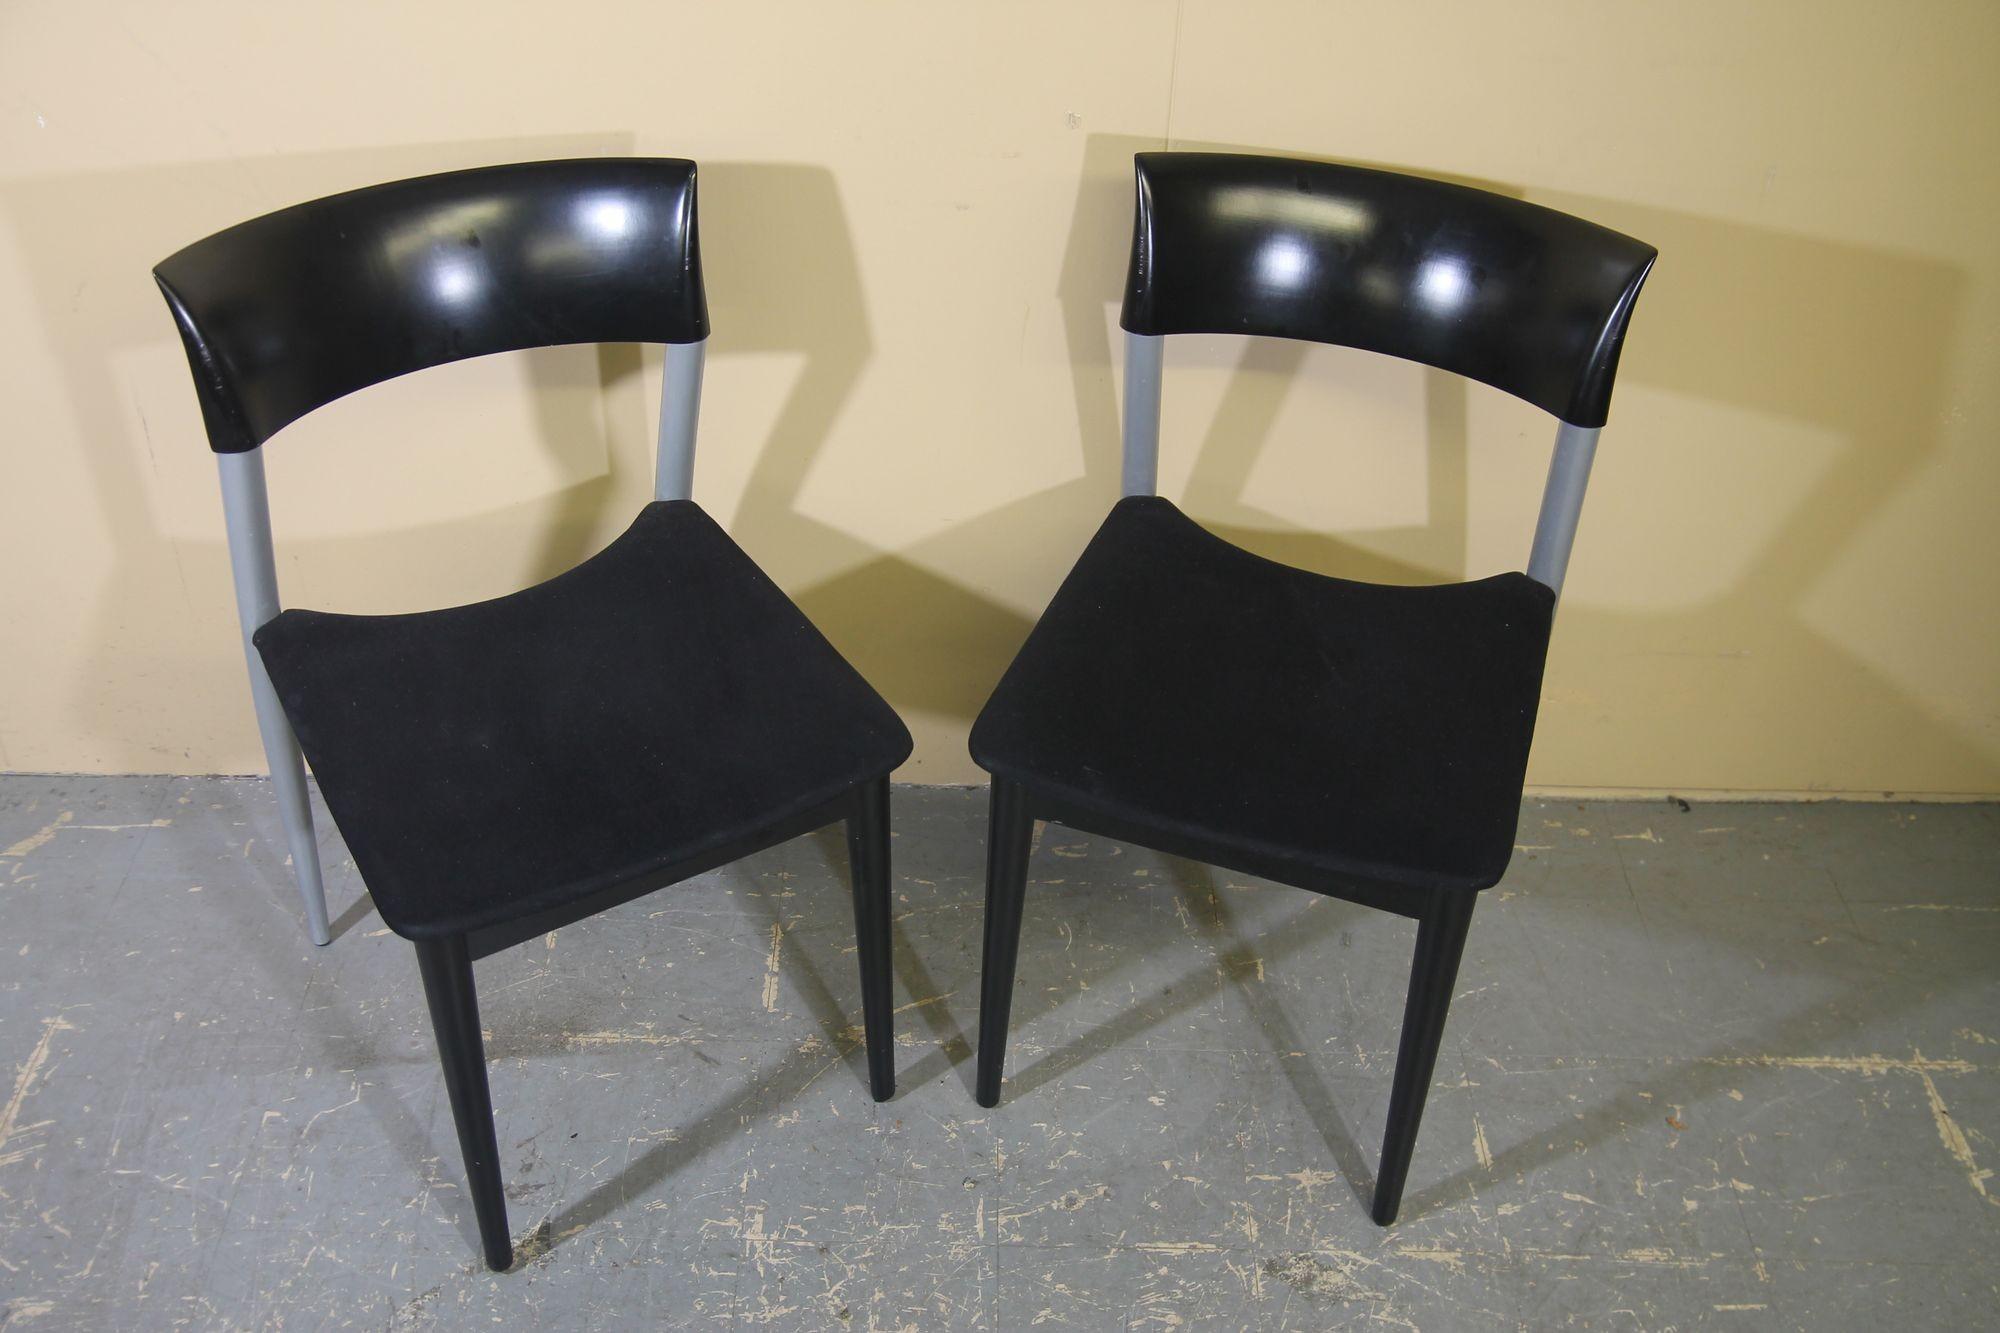 Nice pair of Italian chairs by Potocco. These chairs are made of wood, metal and fabric. The chairs are in nice vintage condition. These will work great around a small table or as accent chairs.